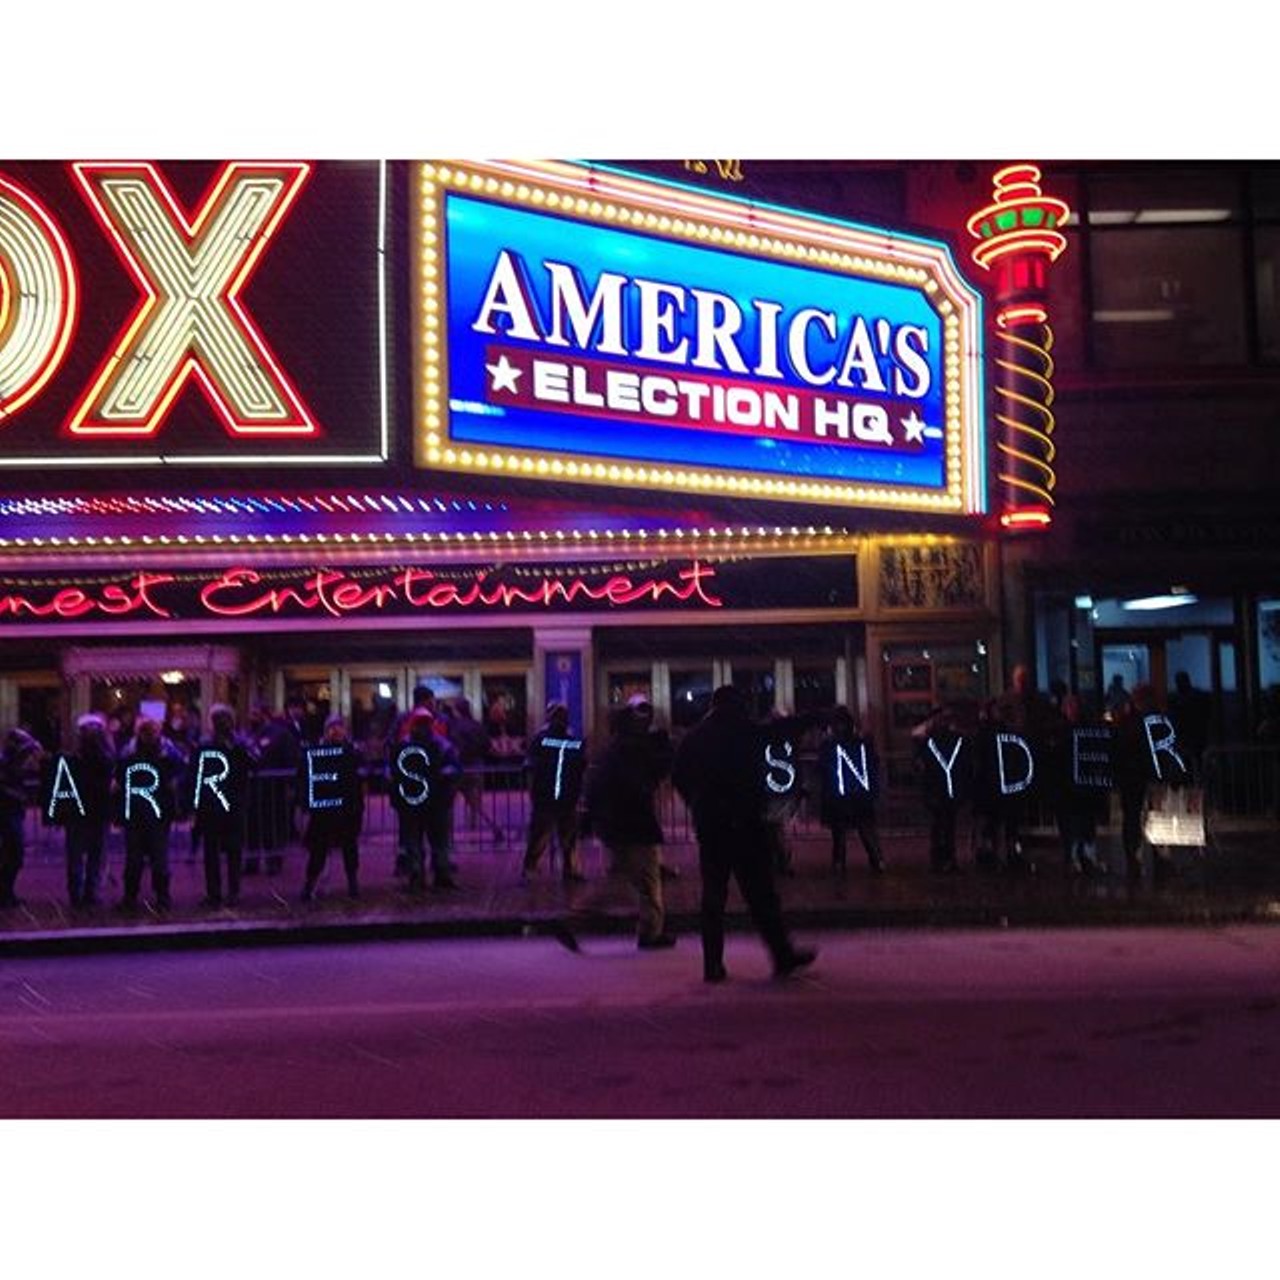 The words &#147;arrest Snyder&#148; shone in the night in front of the debate venue. 
Photo via Instagram user @MsLadyJustice1